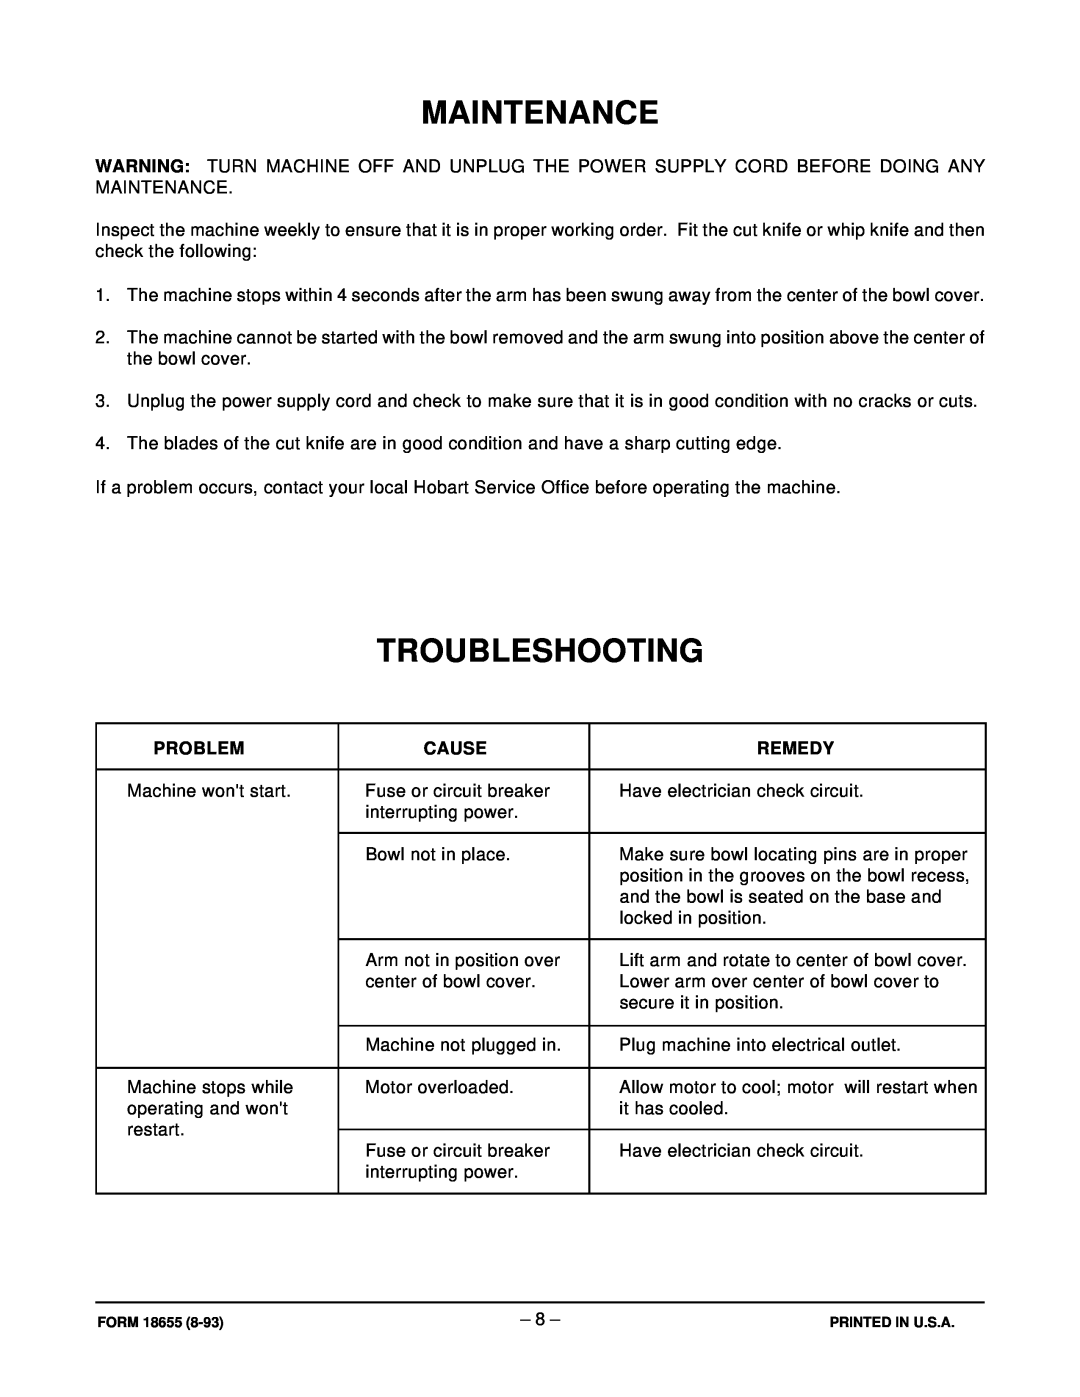 Hobart FP41 manual Maintenance, Troubleshooting, Problem, Cause, Remedy 